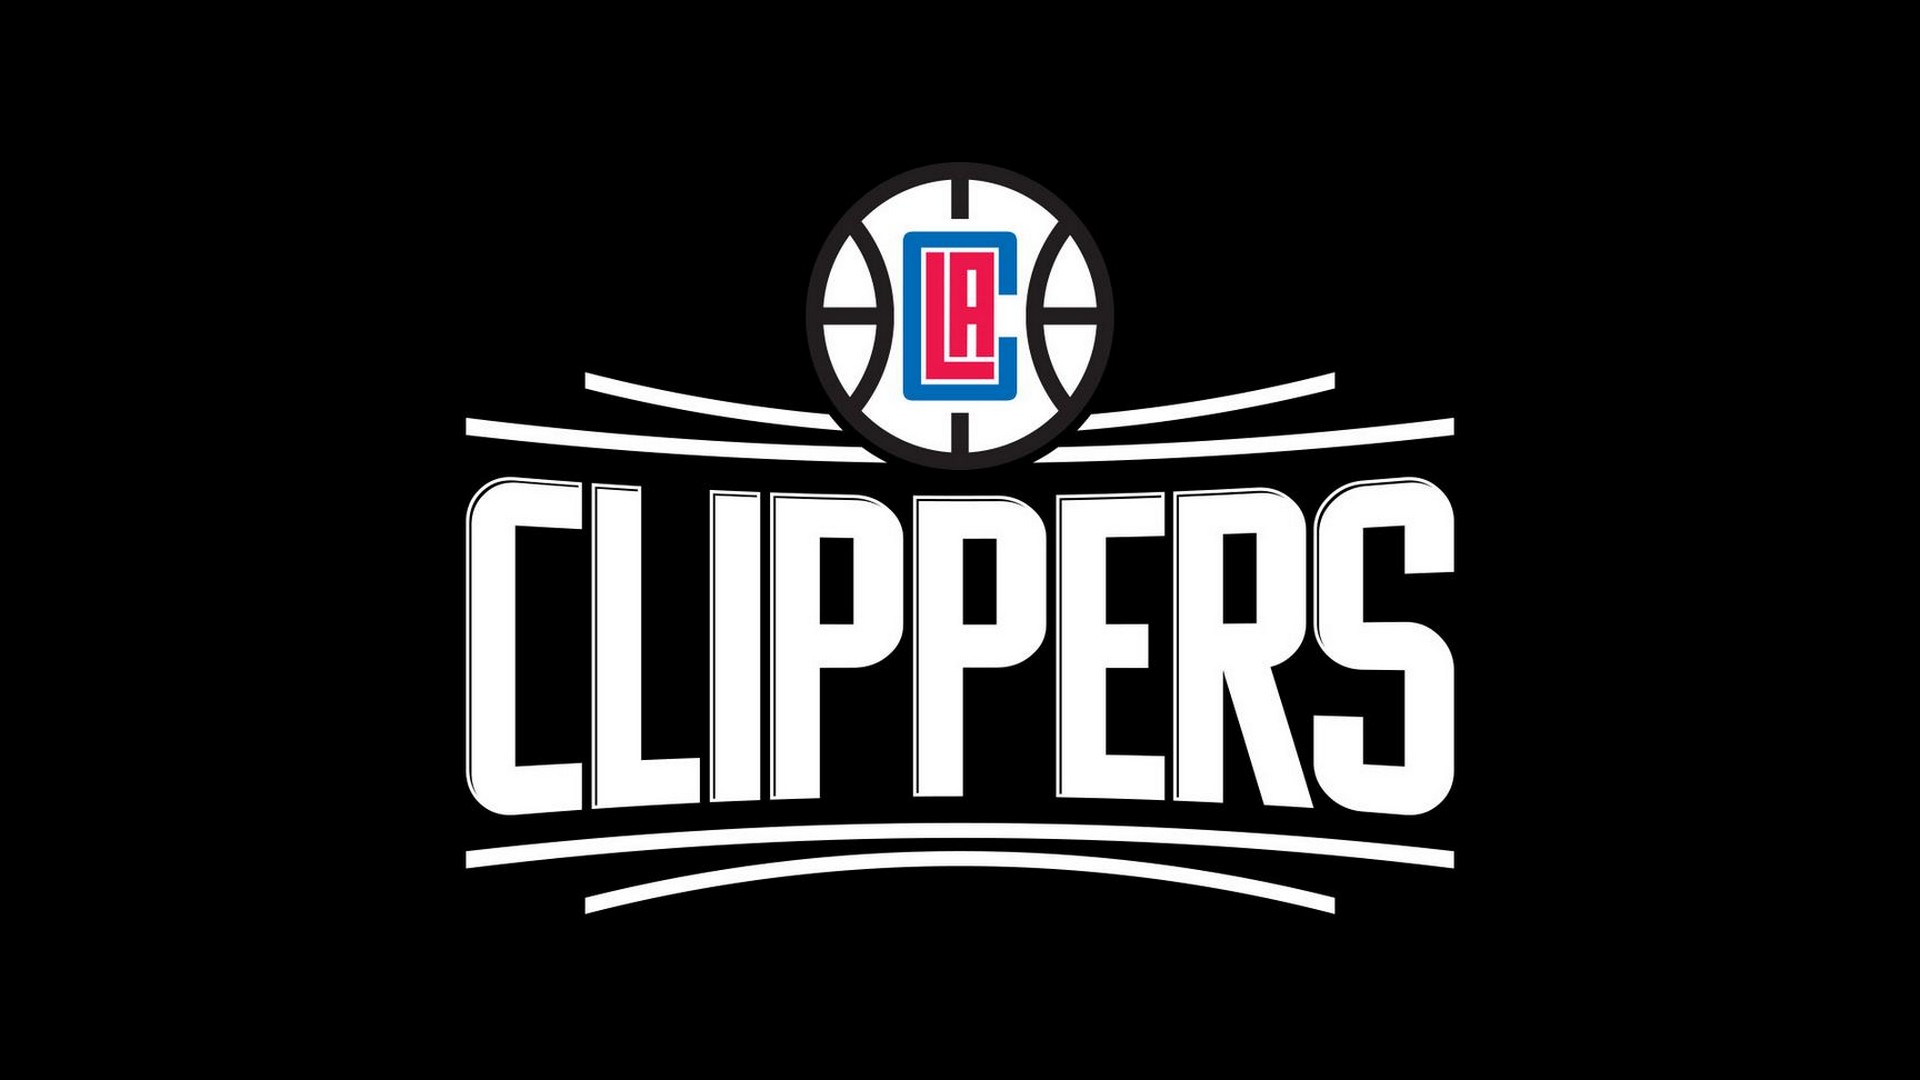 Los Angeles Clippers Wallpaper For Mac Backgrounds with high-resolution 1920x1080 pixel. You can use this wallpaper for your Desktop Computer Backgrounds, Windows or Mac Screensavers, iPhone Lock screen, Tablet or Android and another Mobile Phone device